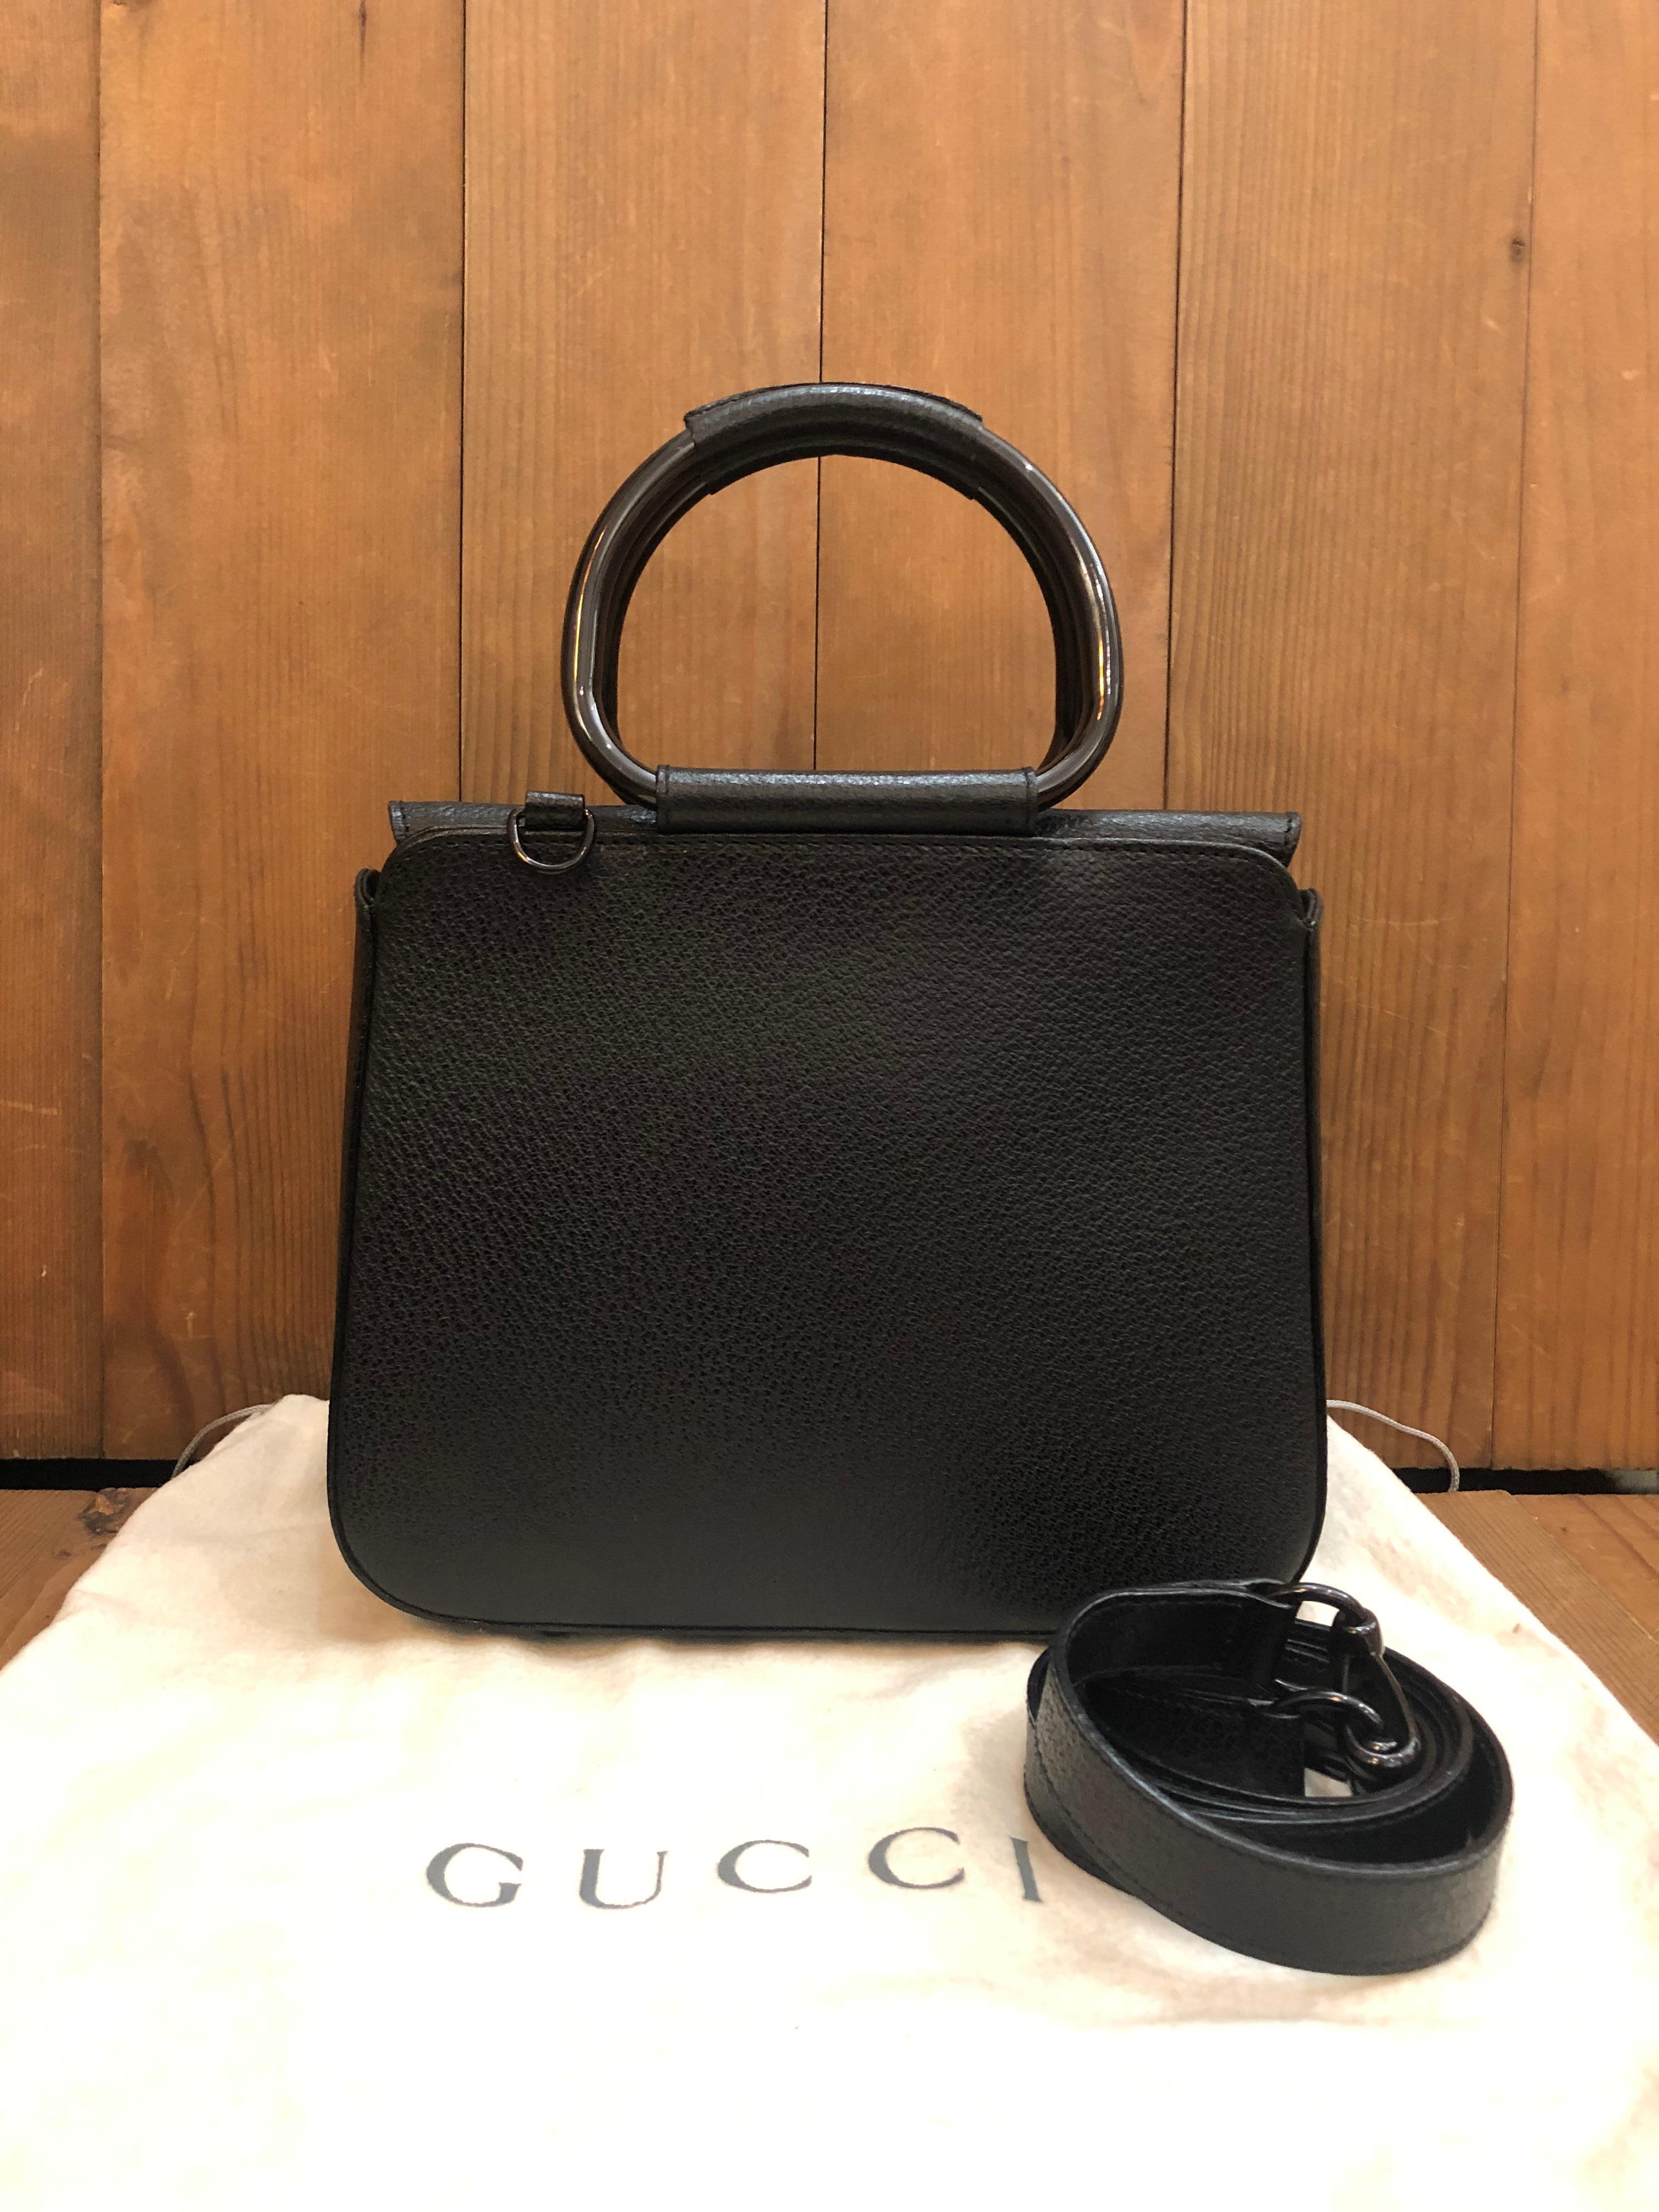 This vintage GUCCI crossbody bag is crafted of pigskin leather in black featuring black enameled hardware and rolled leather metallic handles. Top magnetic snap closure opens to a coated interior which has been professionally cleaned featuring a